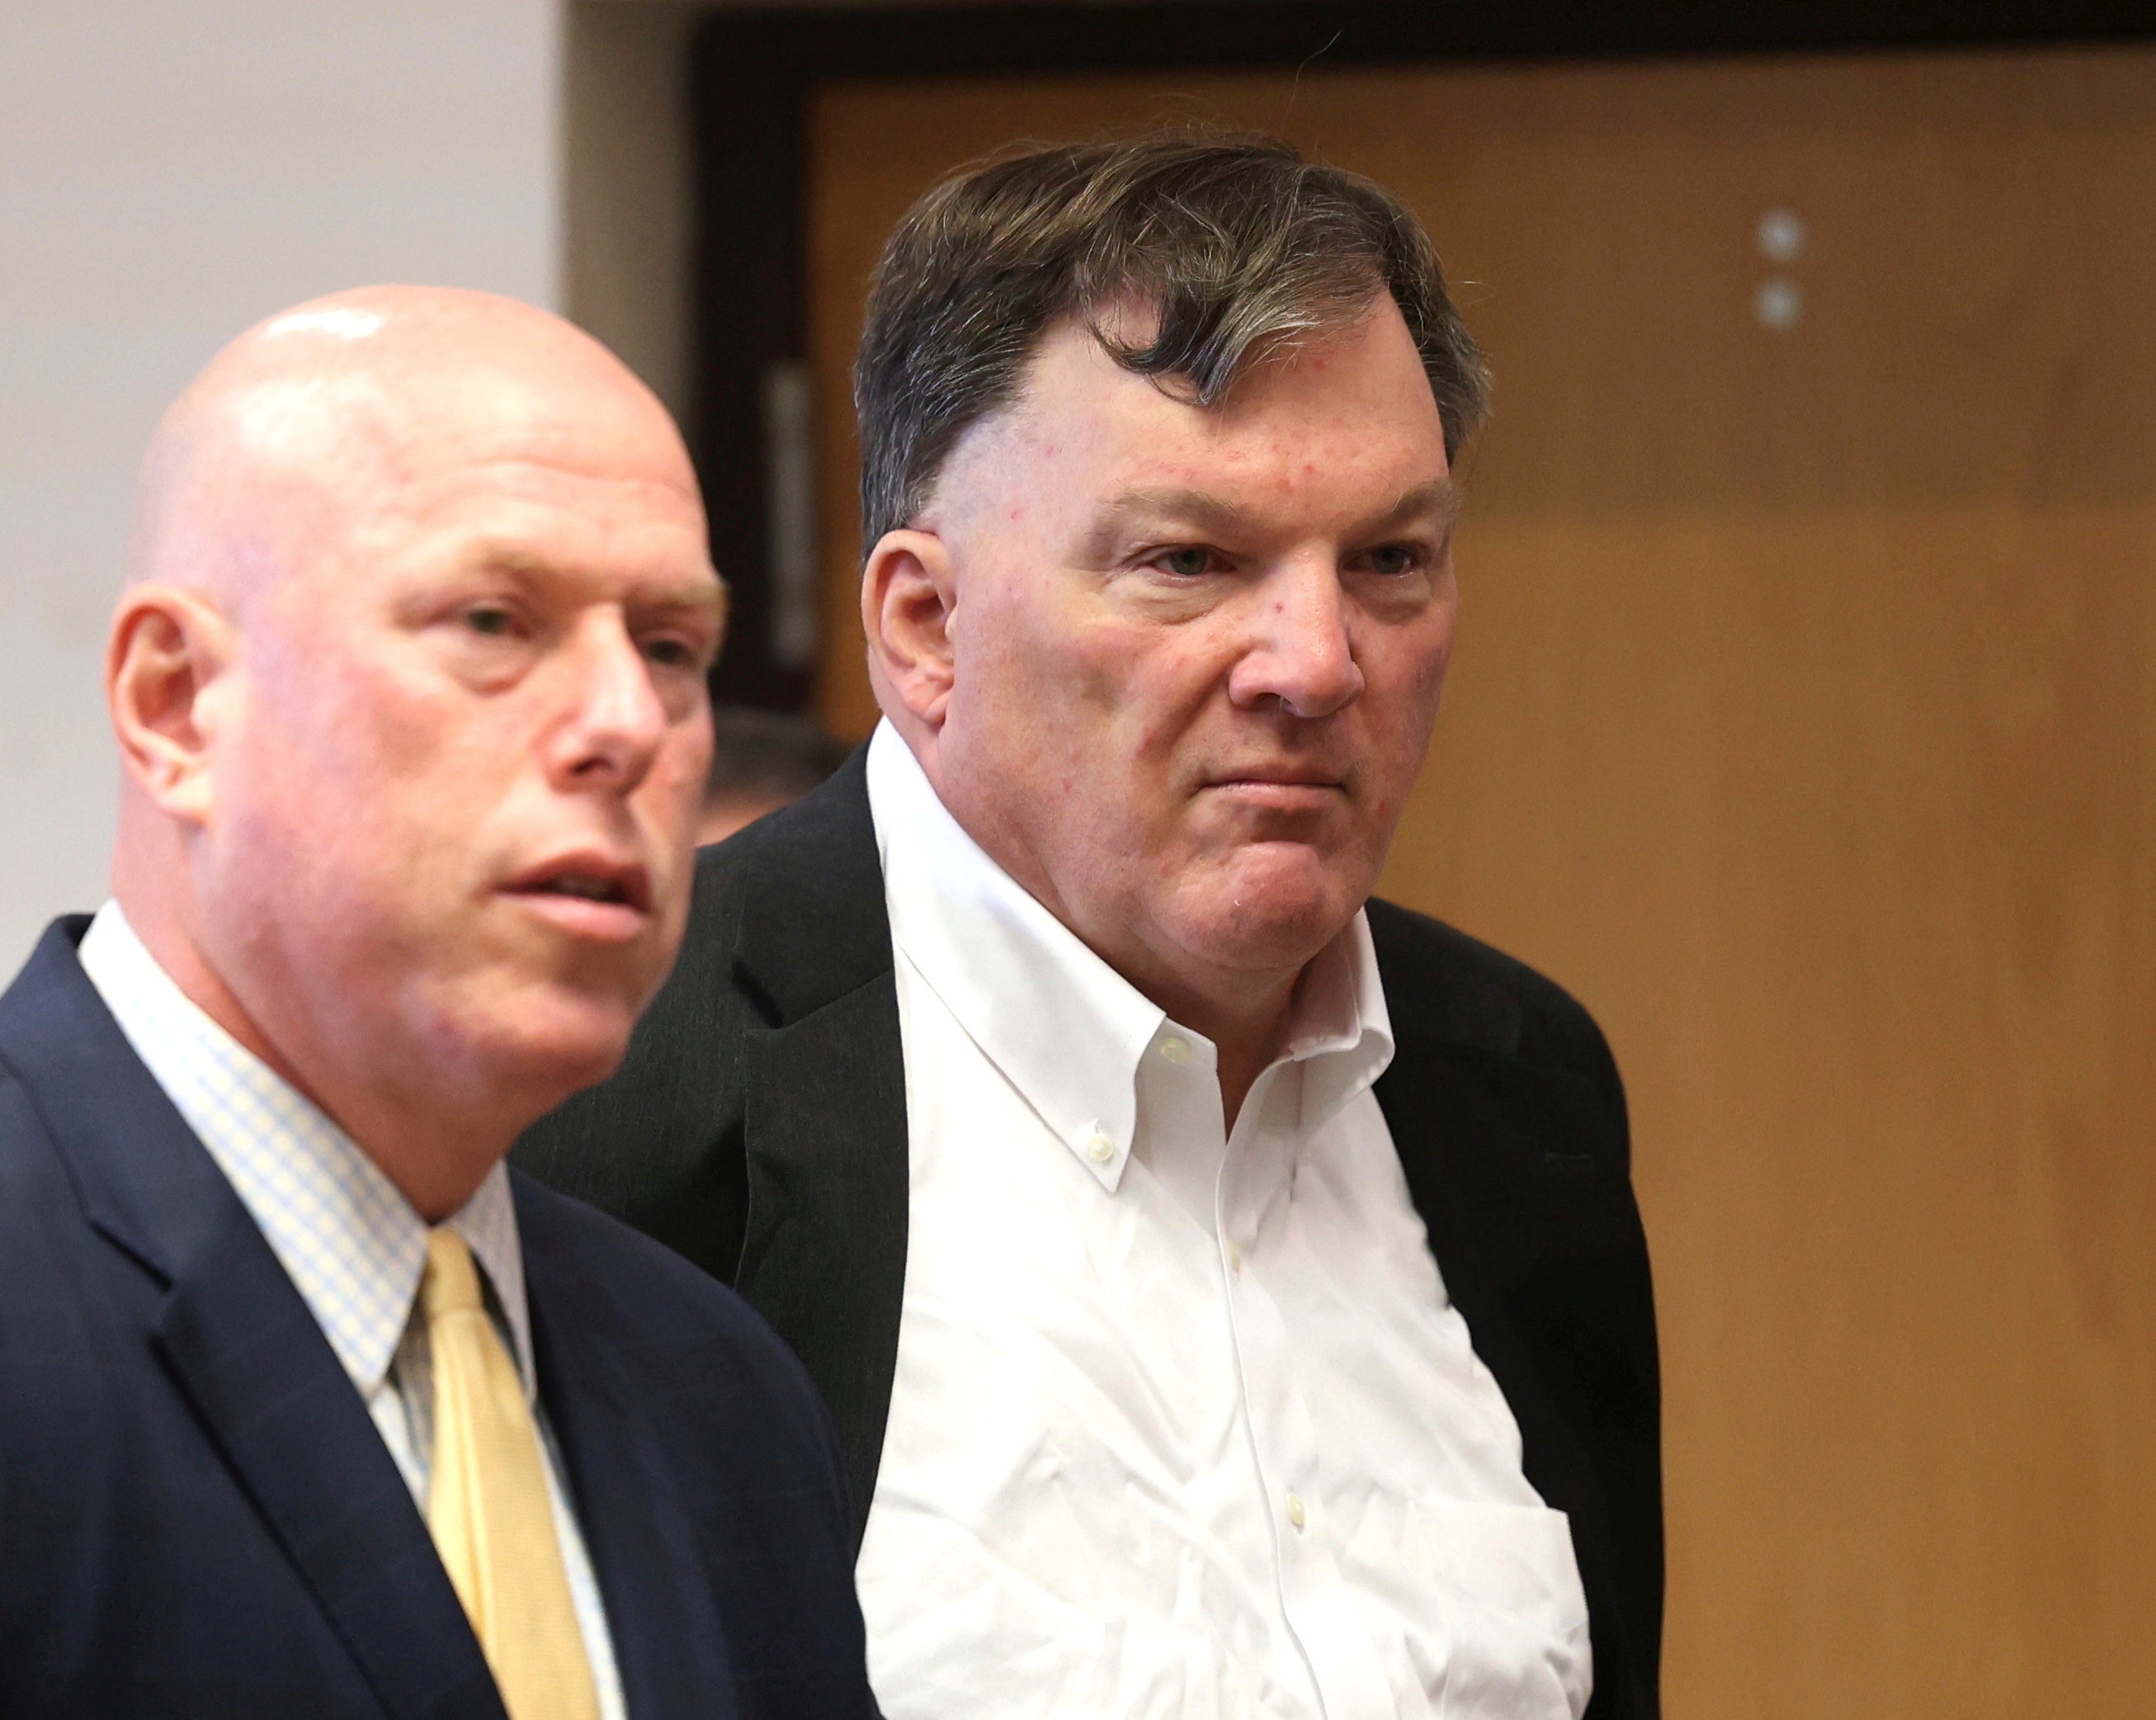 Rex Heuermann appears with his lawyer Michael J. Brown, left, at Suffolk County Court in Riverhead